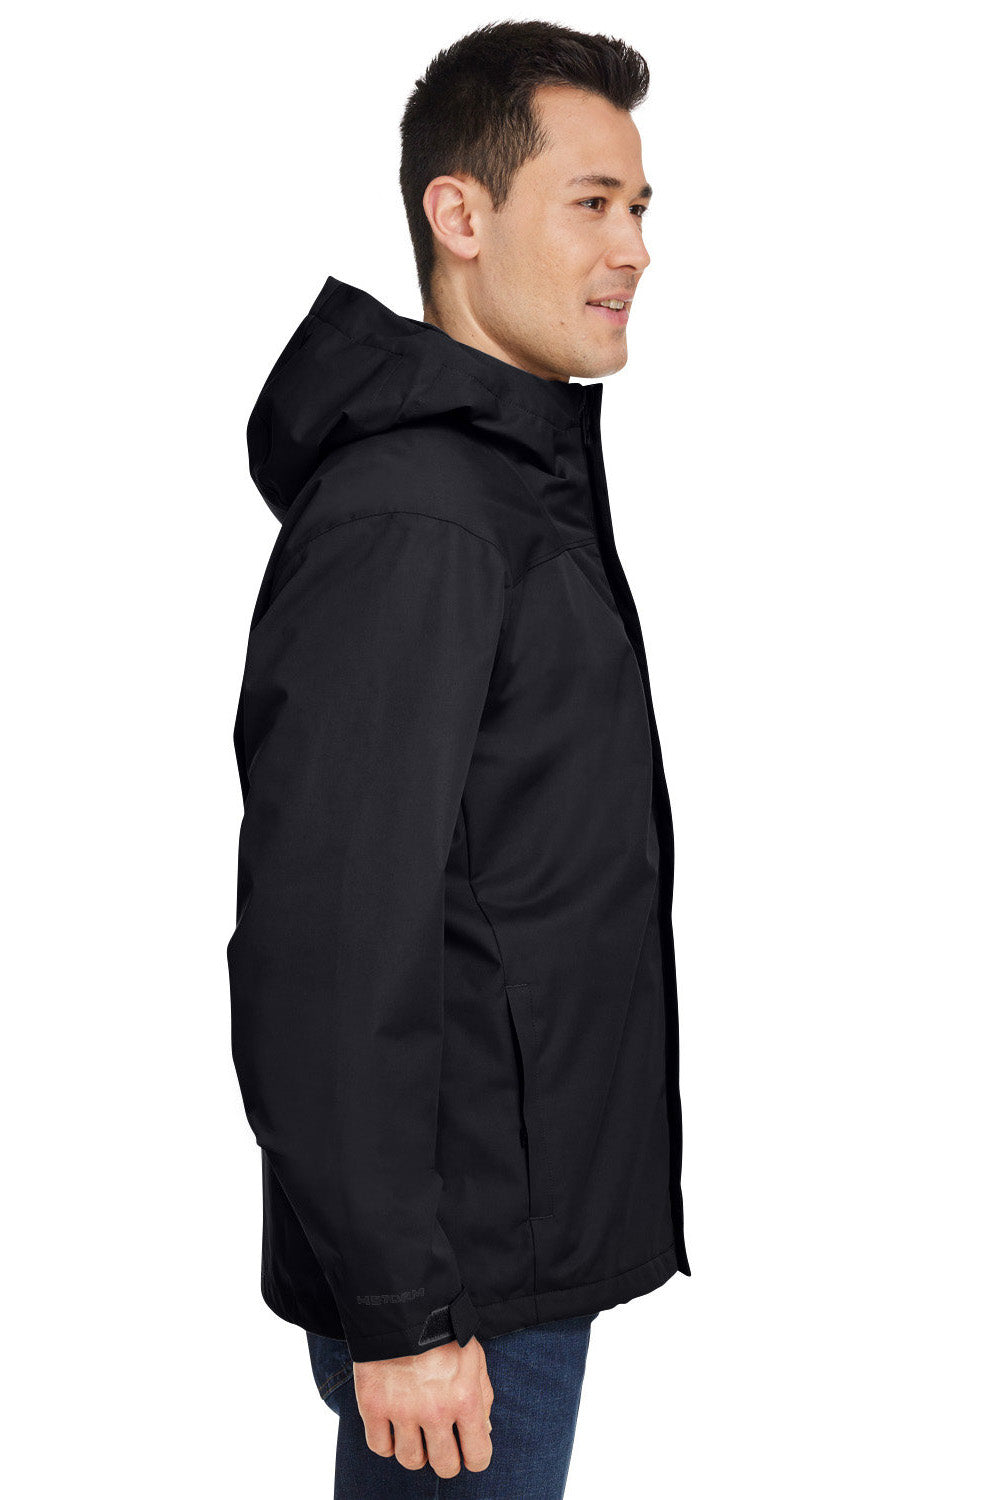 Under Armour 1371585 Mens Porter 2.0 Moisture Wicking 3-In-1 Full Zip Hooded Jacket Black/Pitch Grey Model Side